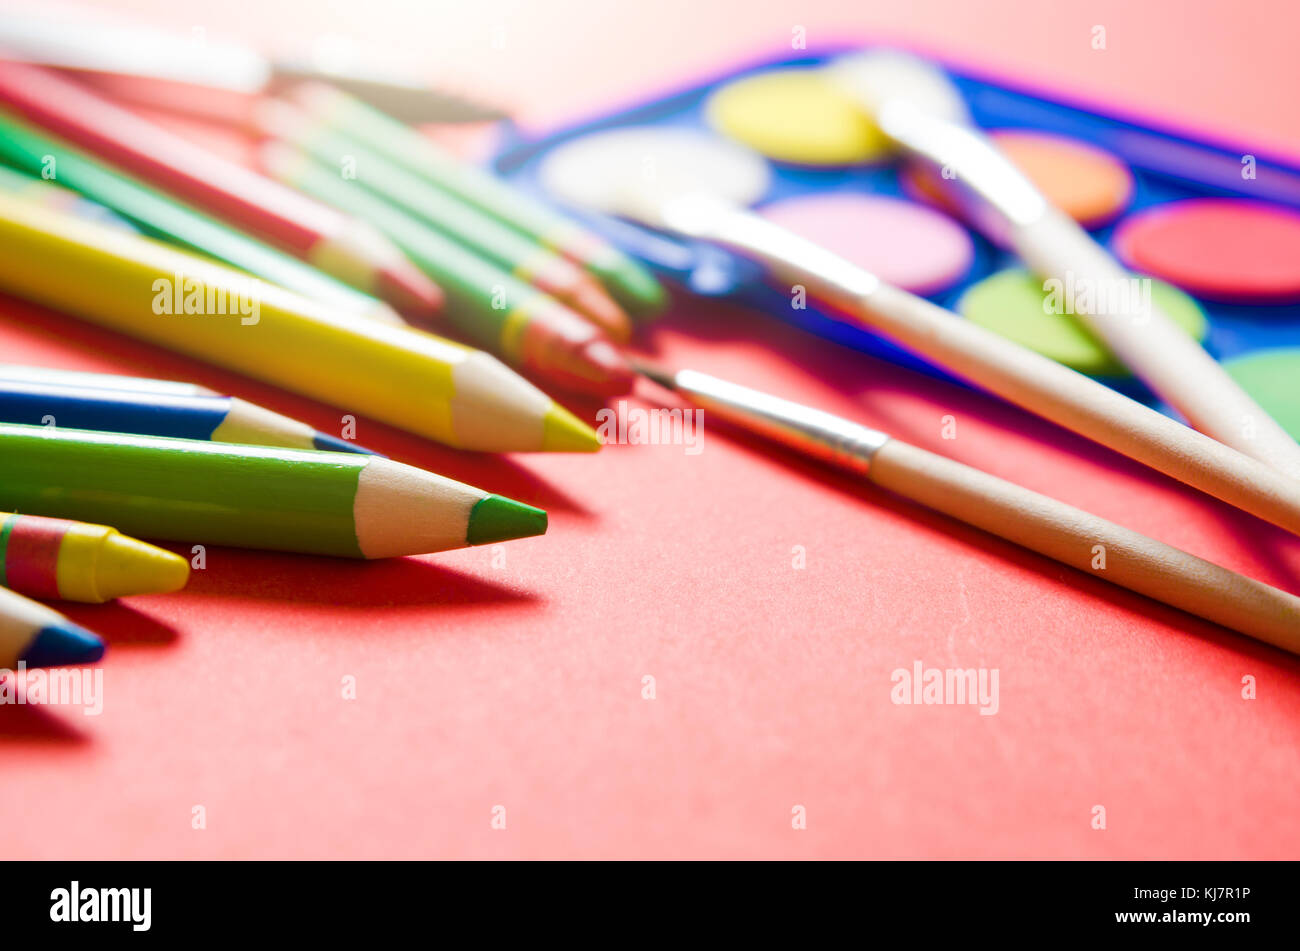 Back to school concept with stationery and school supplies. school back homework education tools wooden stationery concept Stock Photo